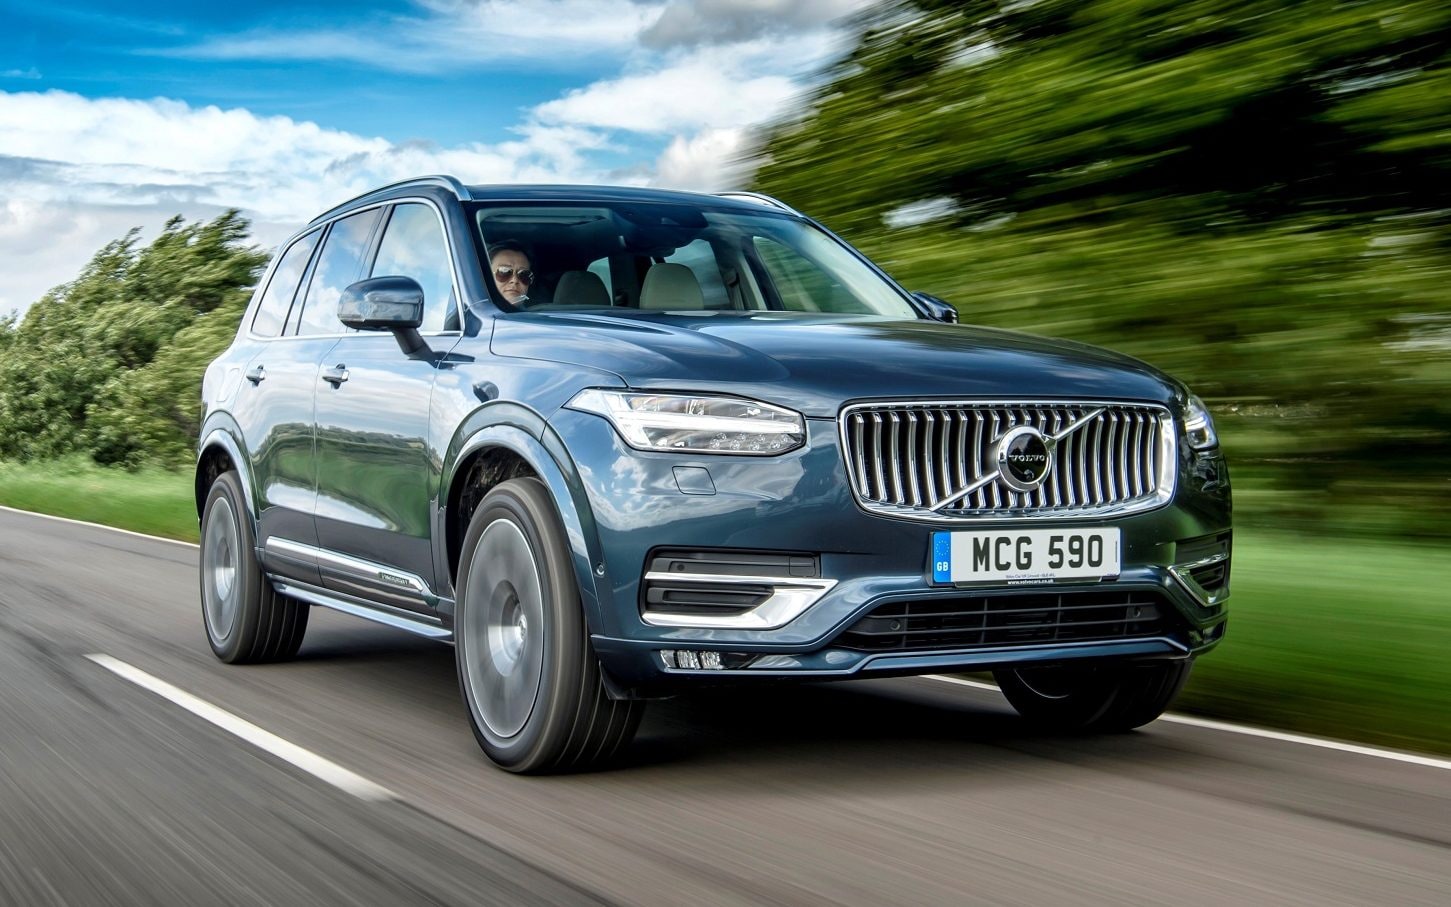 Volvo Xc90 Named A 2020 Best Luxury Car By Parents Magazine Portland